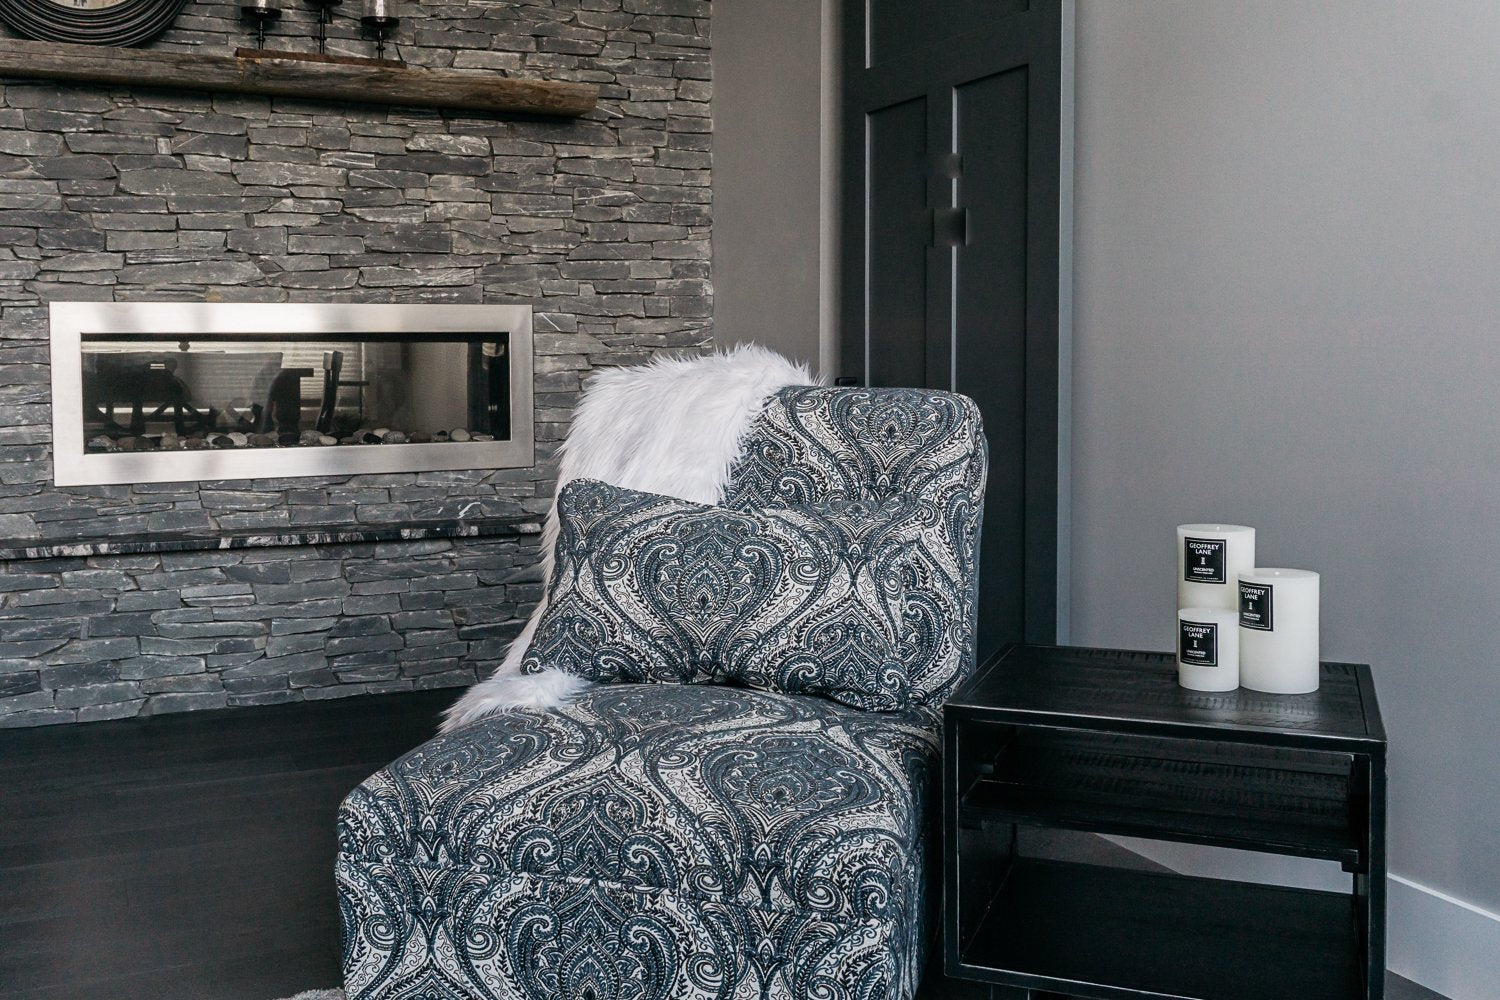 Shop for Lounge Chairs, occasional Chairs and accent chairs at Urban Settler. Chairs that create the perfect accent and comfortable seating. Rocking chairs and stressless chairs provide unbeatable comfort and relaxation! 